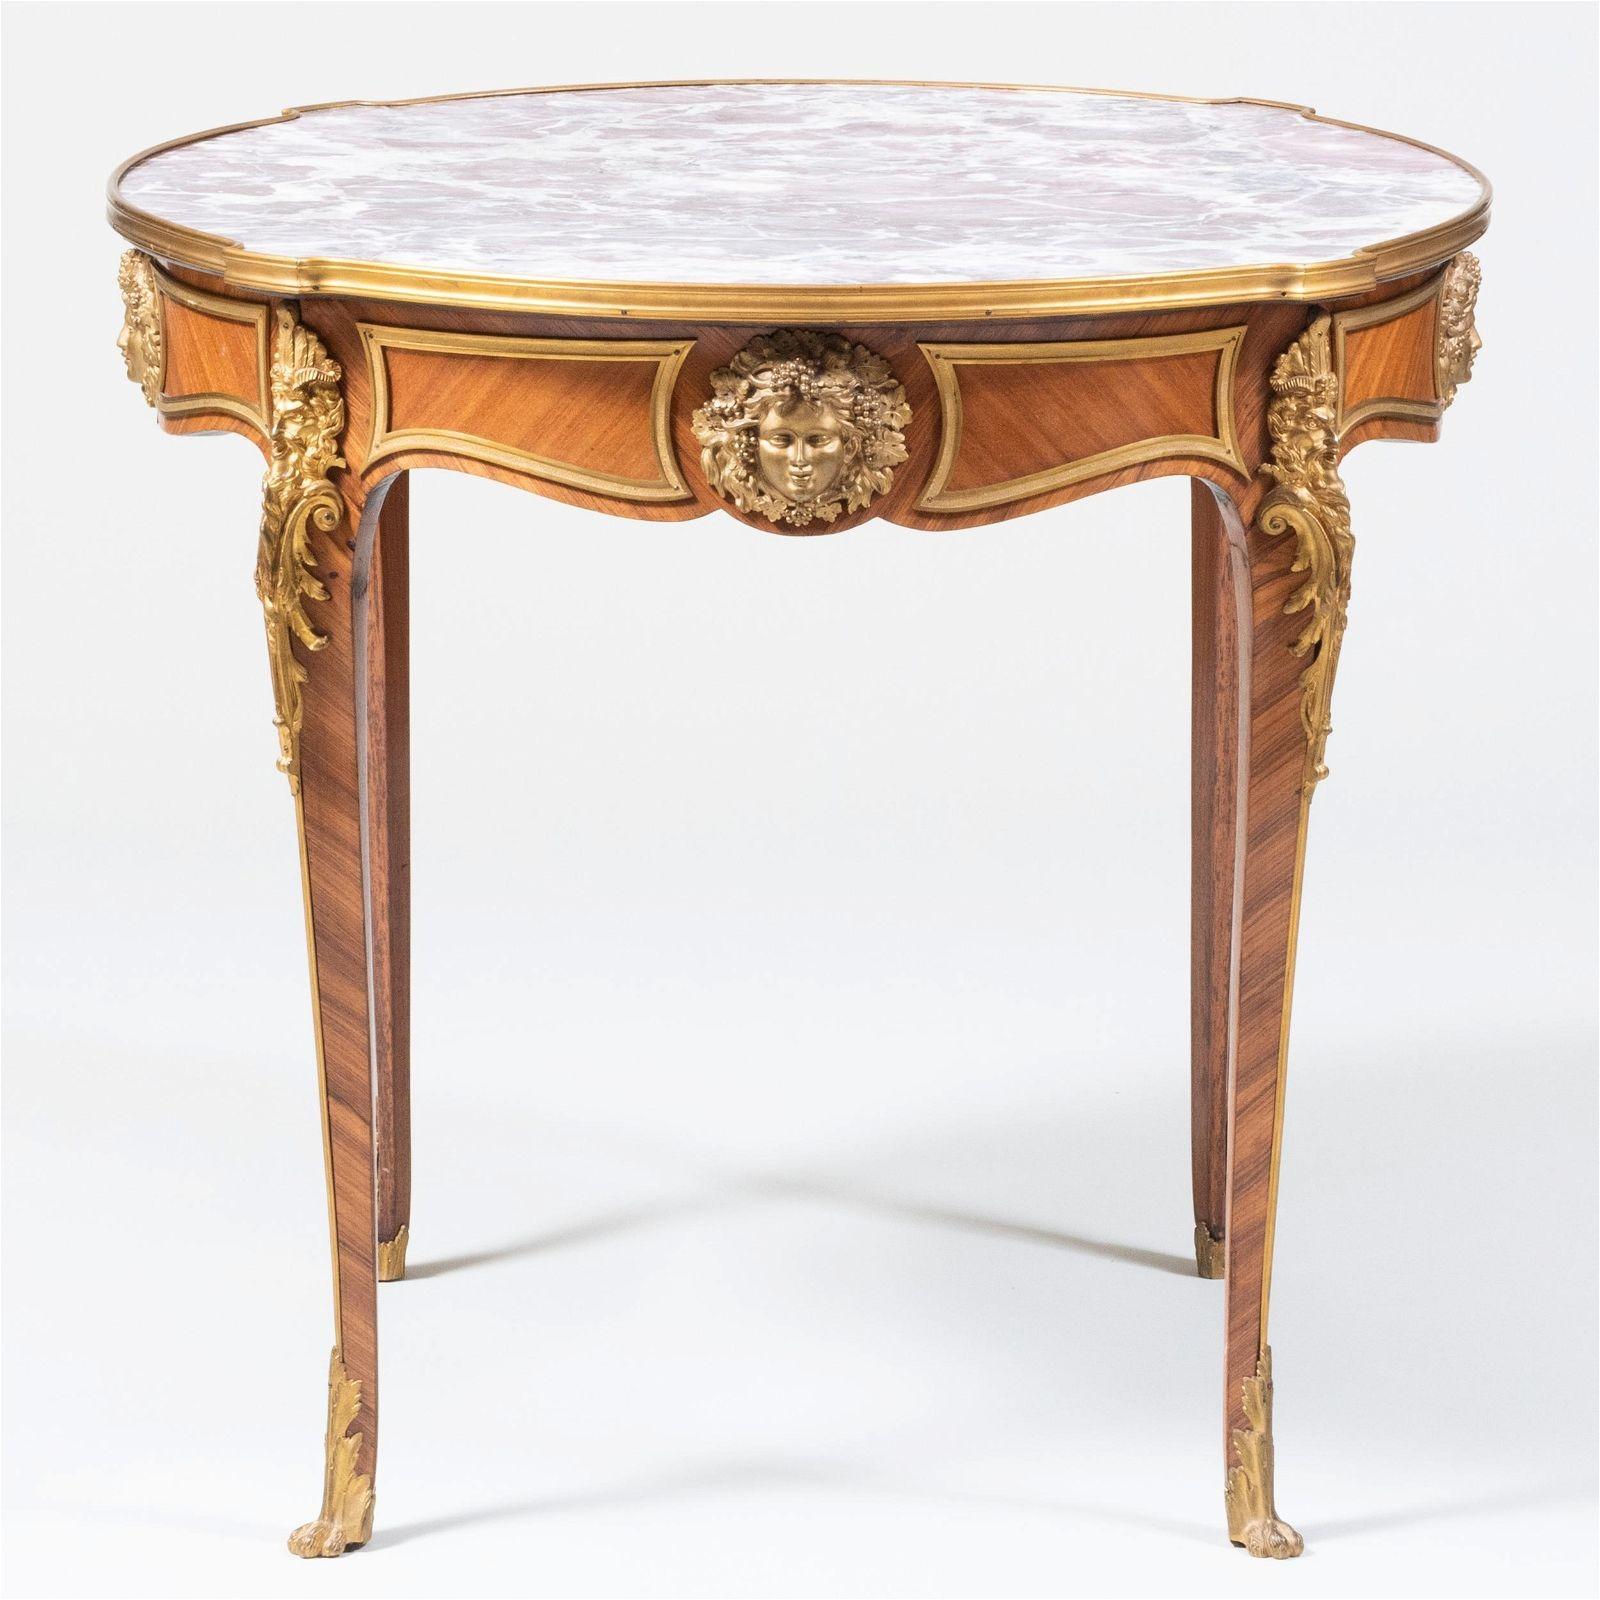 Gilt 19th Century French Bronze Mounted Marble Top Center Table in Louis XV Style For Sale